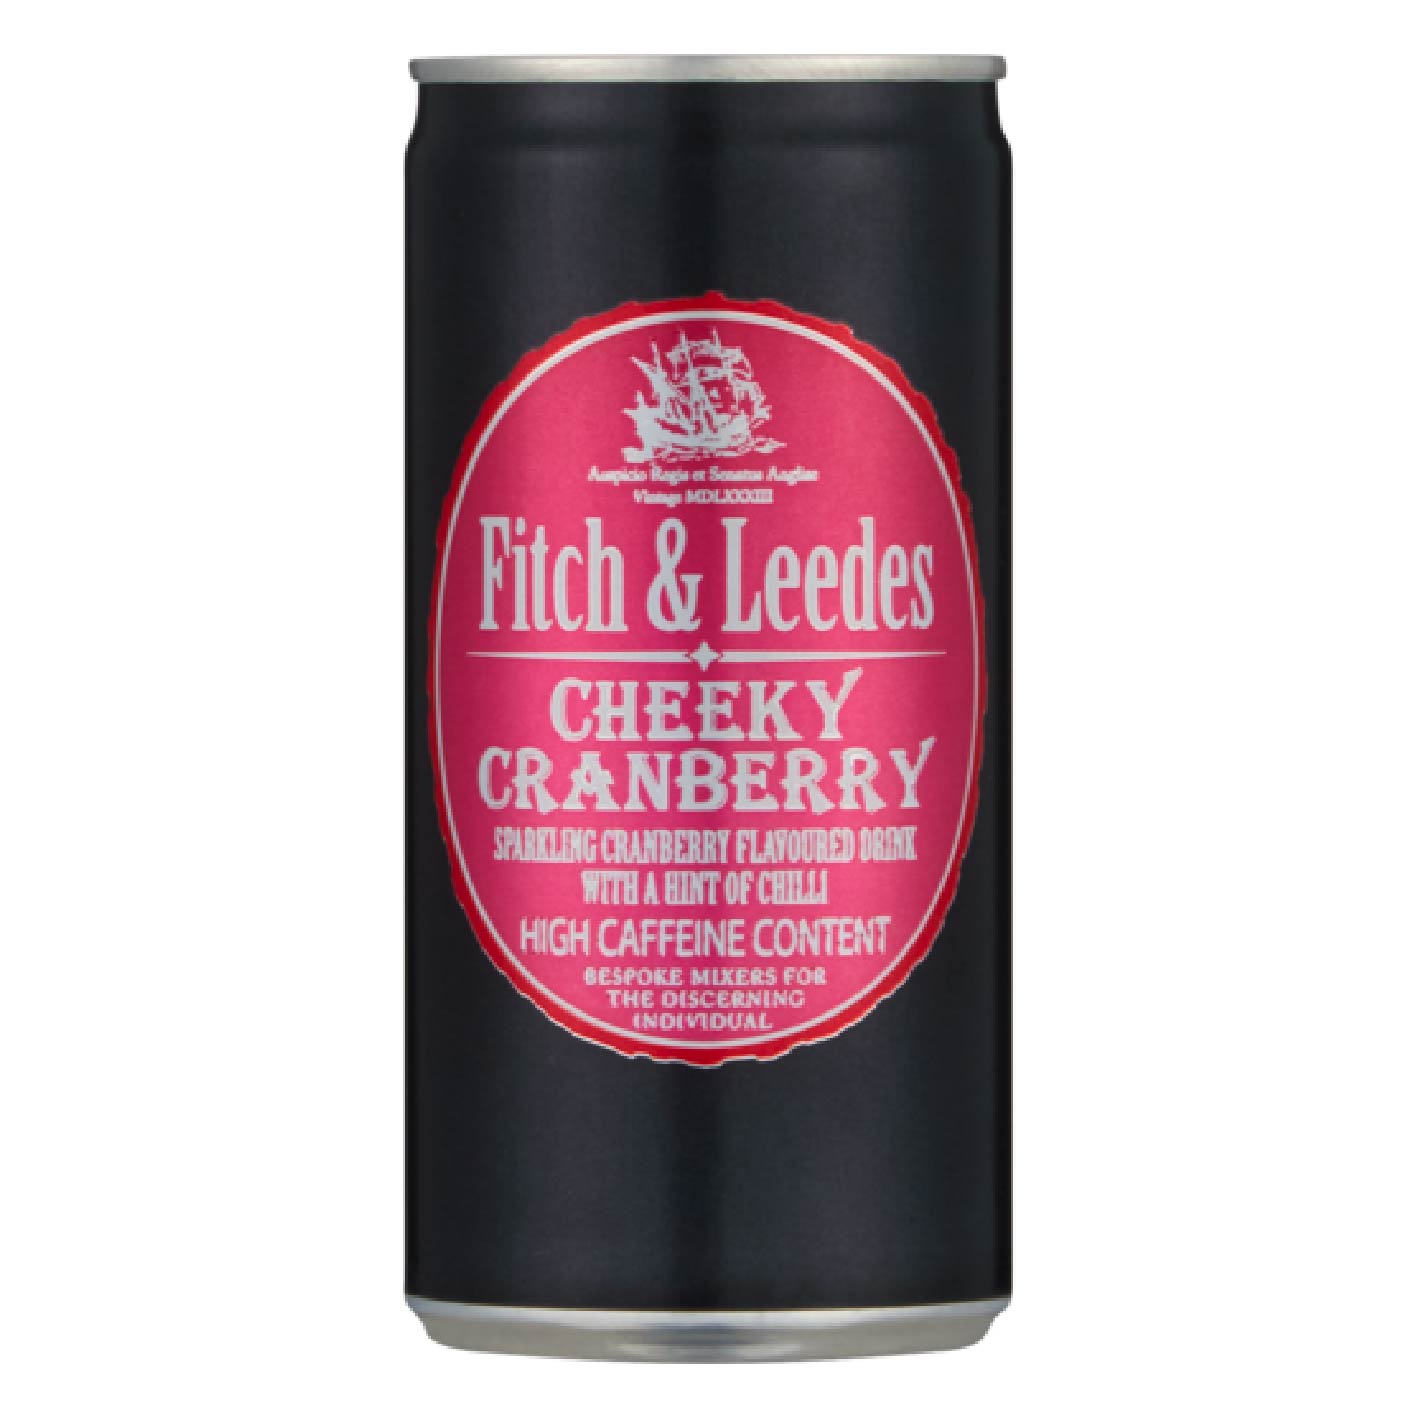 Fitch & Leedes – Cheeky Cranberry, Pack Of 6 Cans, 200ml